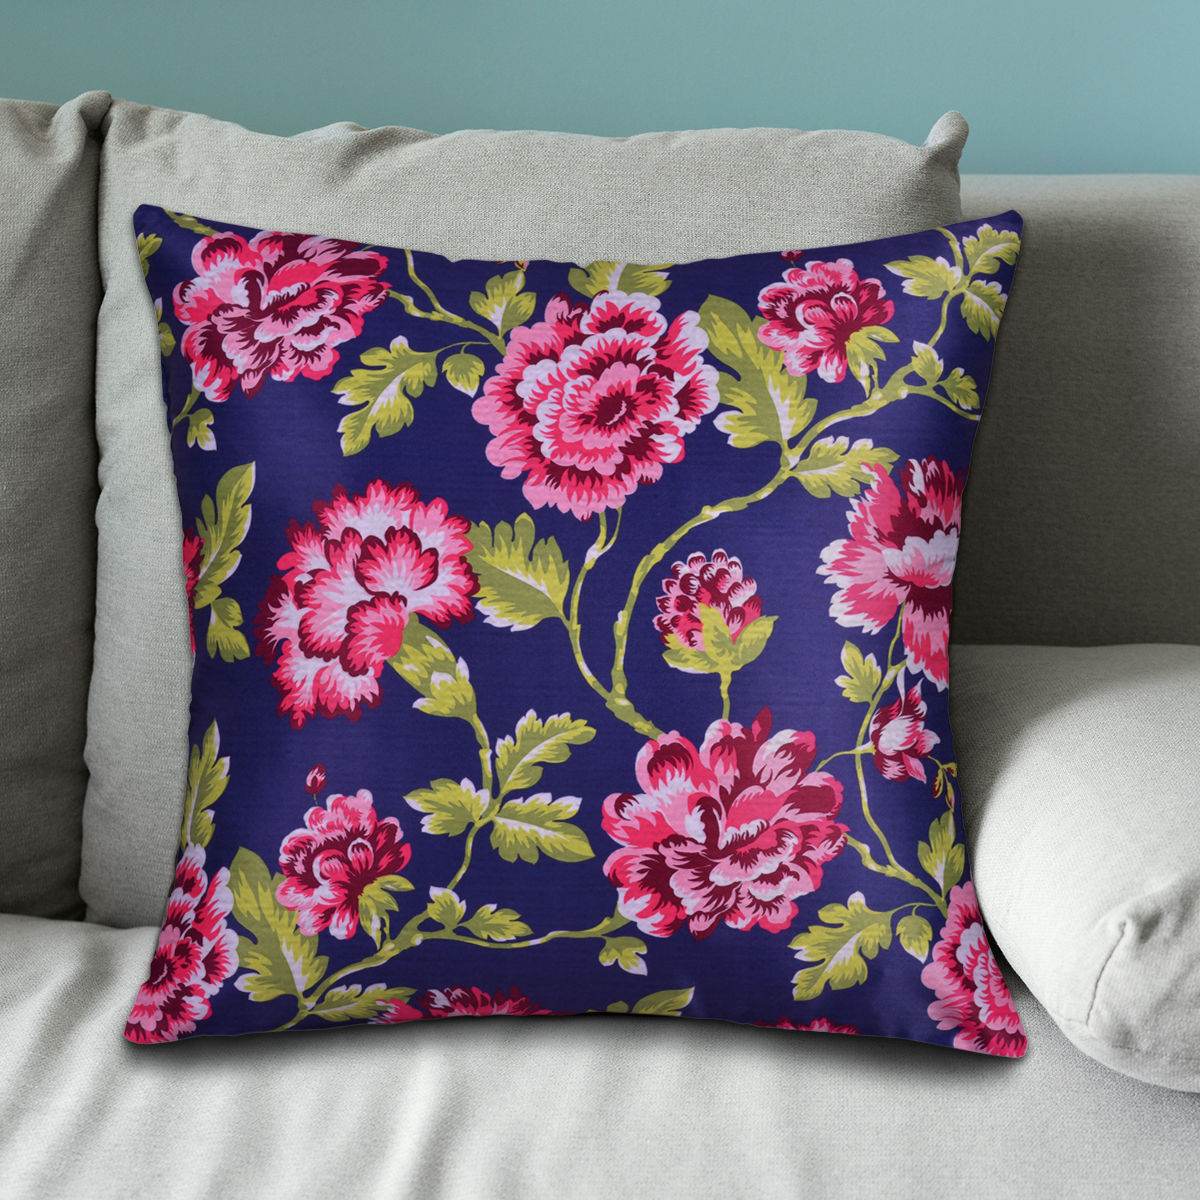 Throw Pillow Covers Set of 1 for Living Room Table, Floral Printed Cushion Case, 20x20 inches - Dark Blue - Home Decor - image 1 of 7